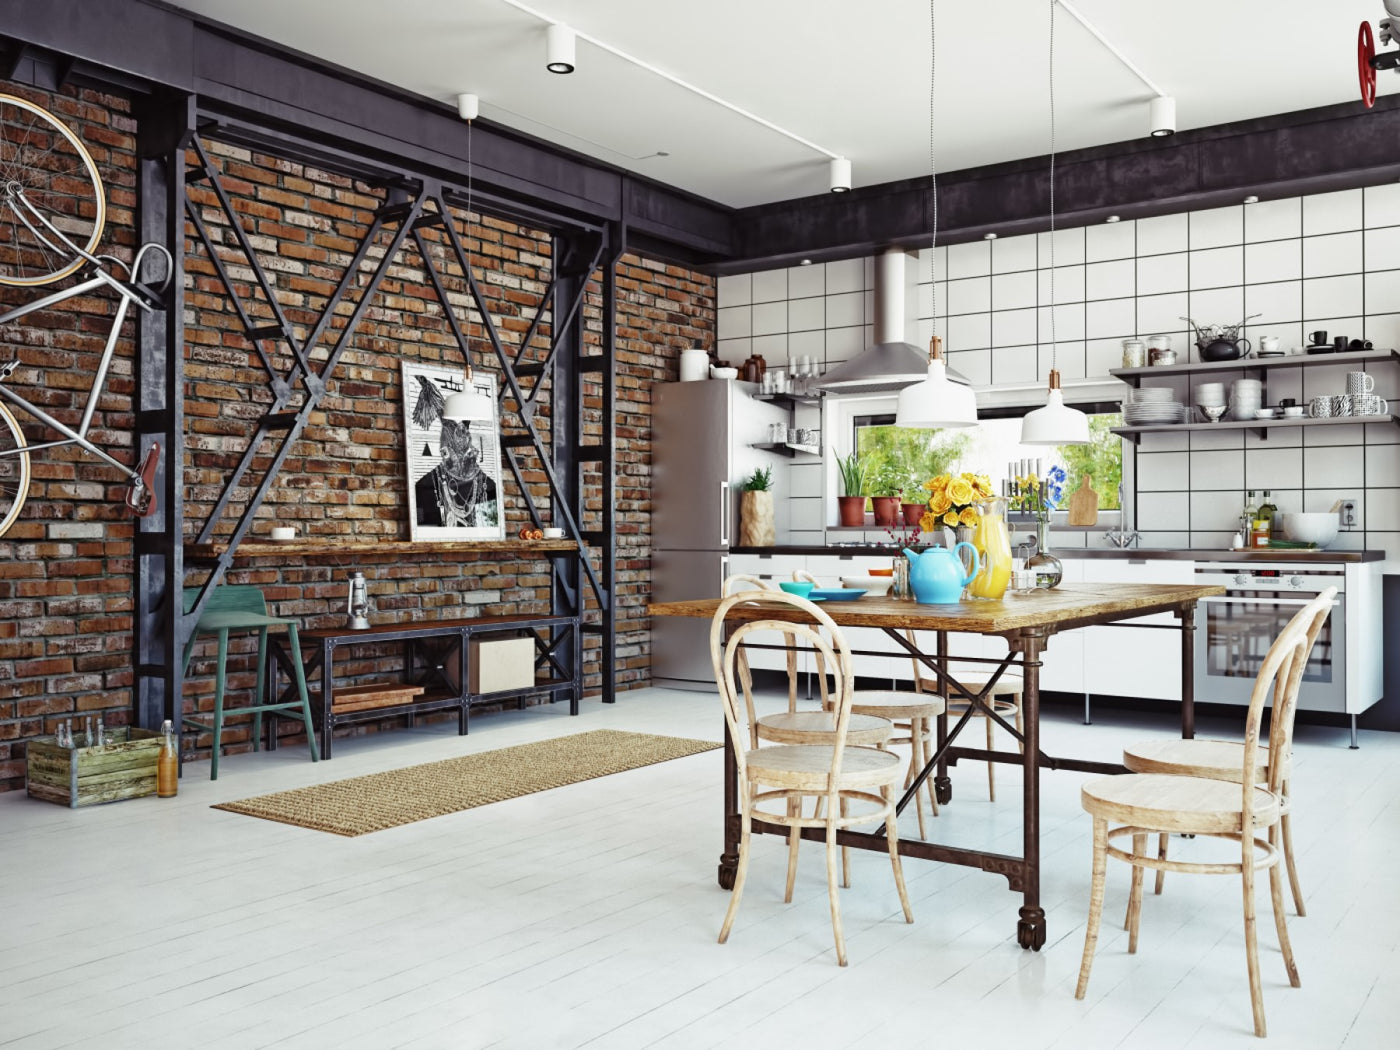 Do You Have Lofty Ambitions For Loft Living?